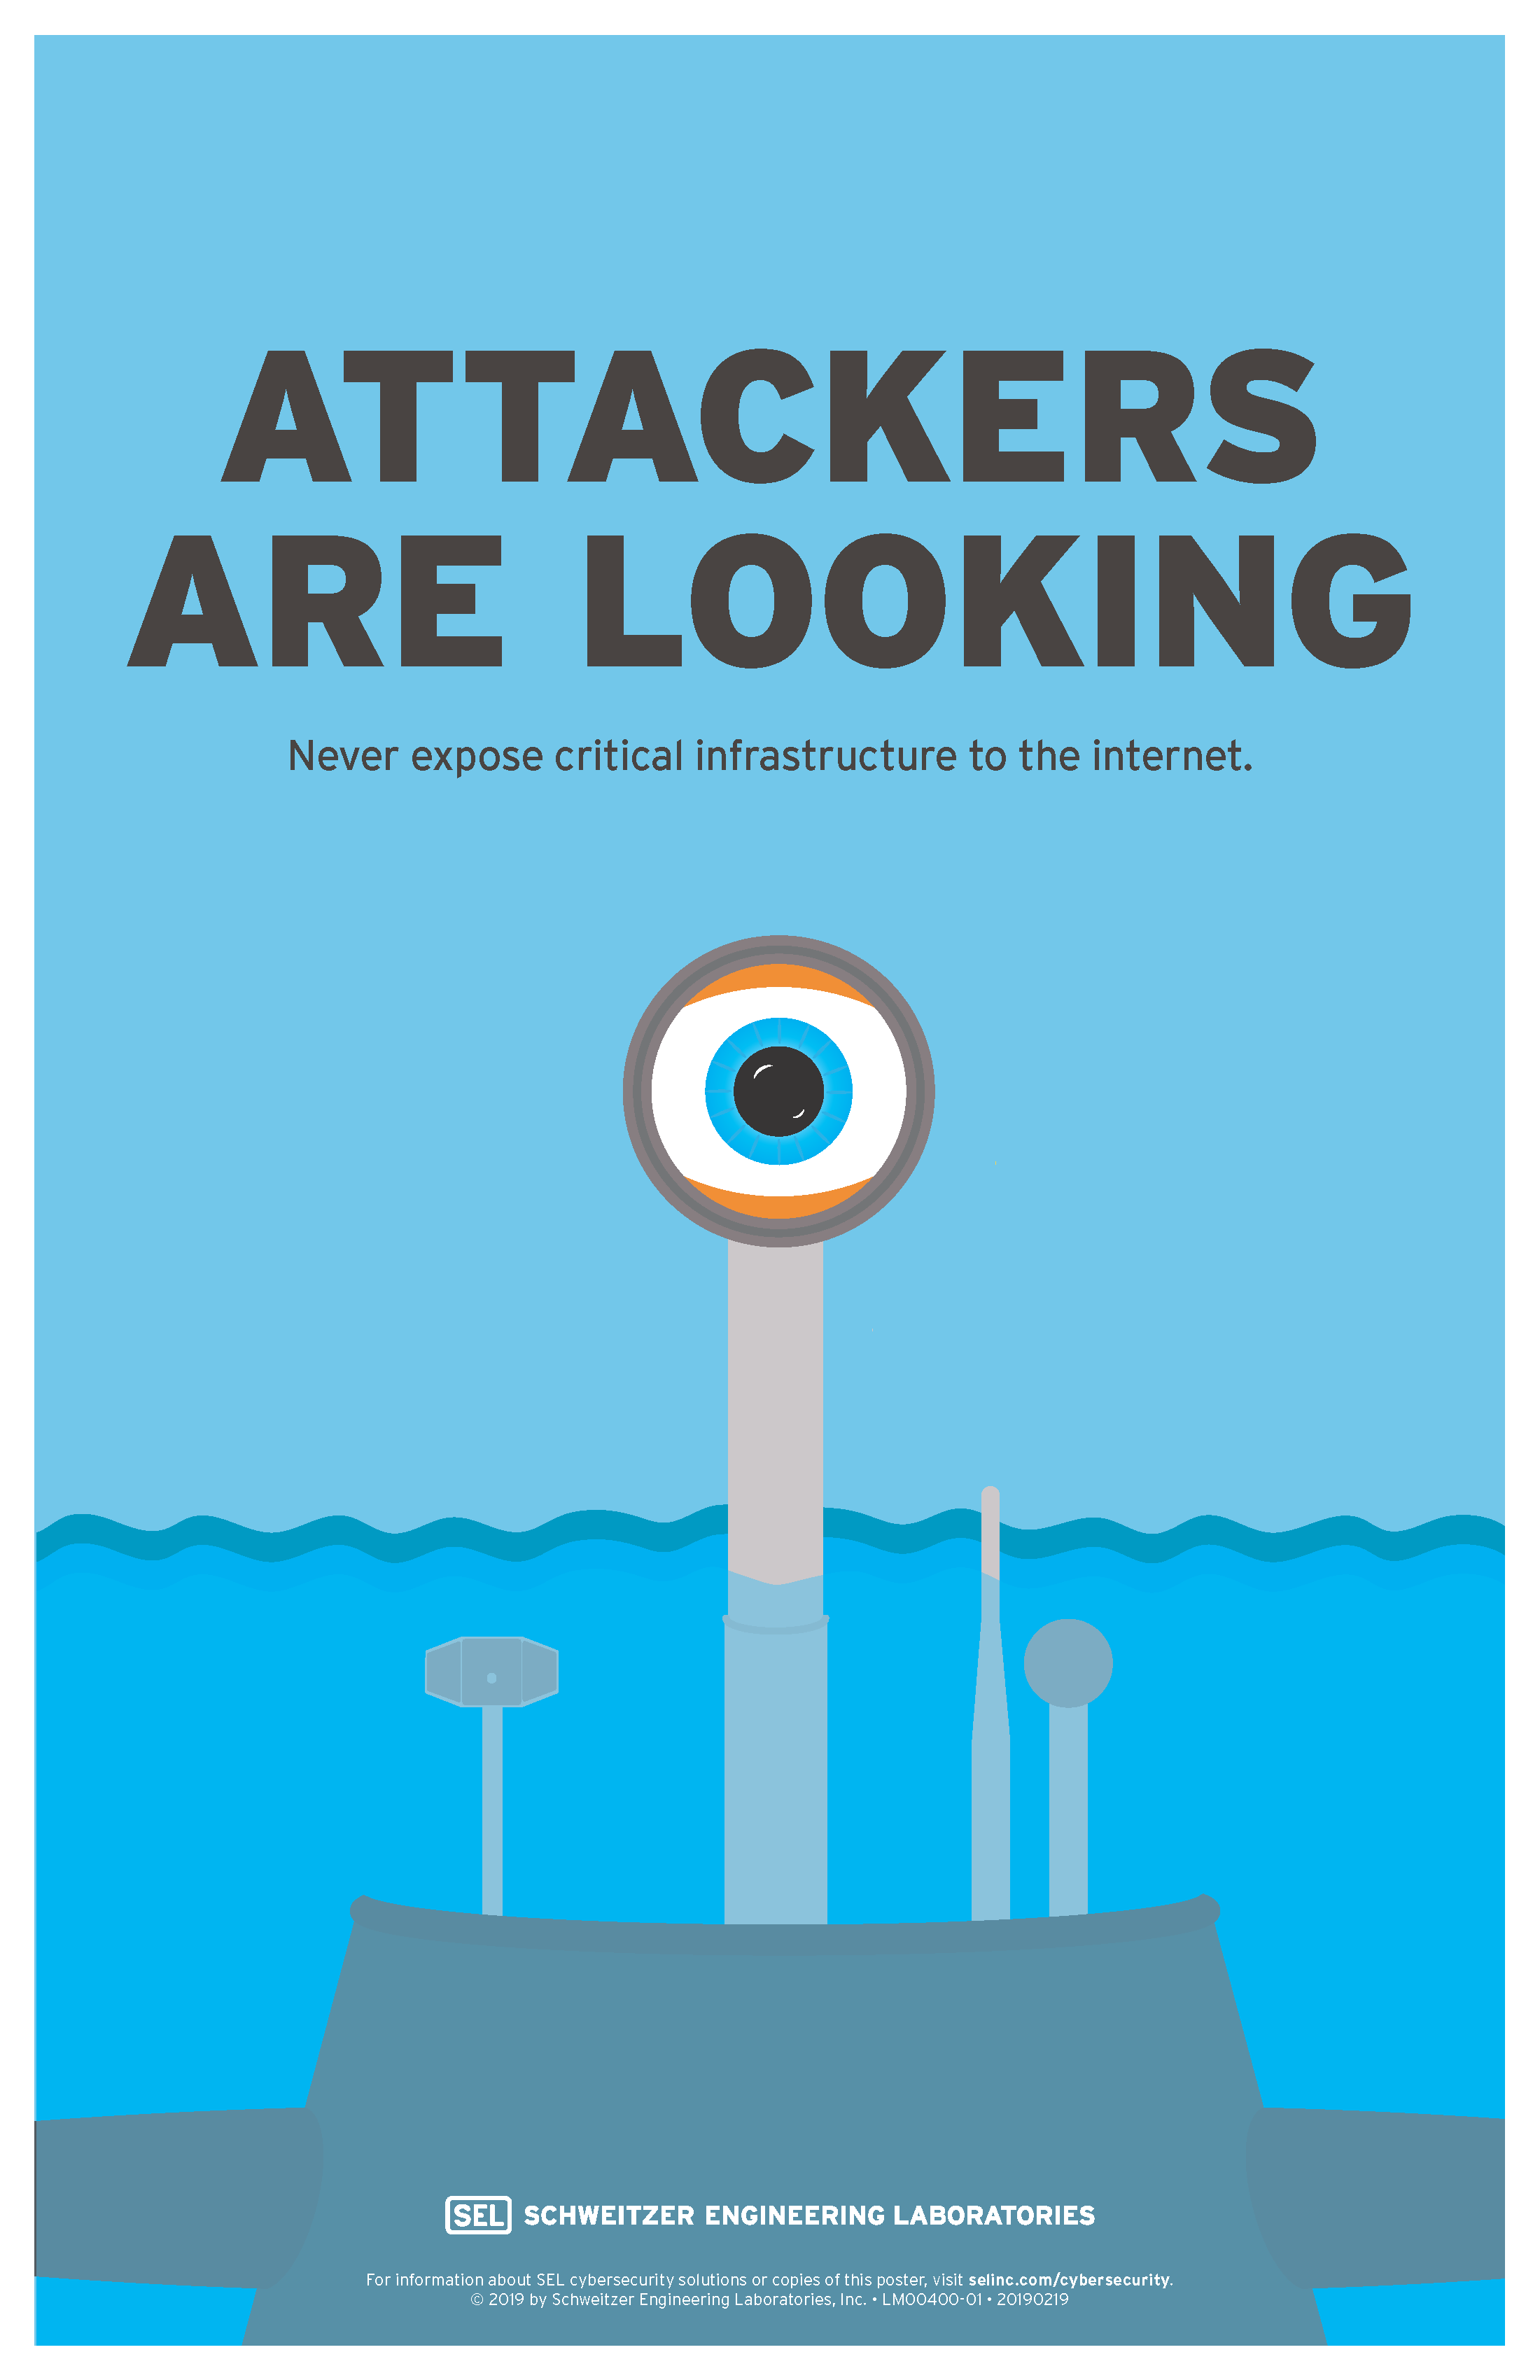 cyber security posters